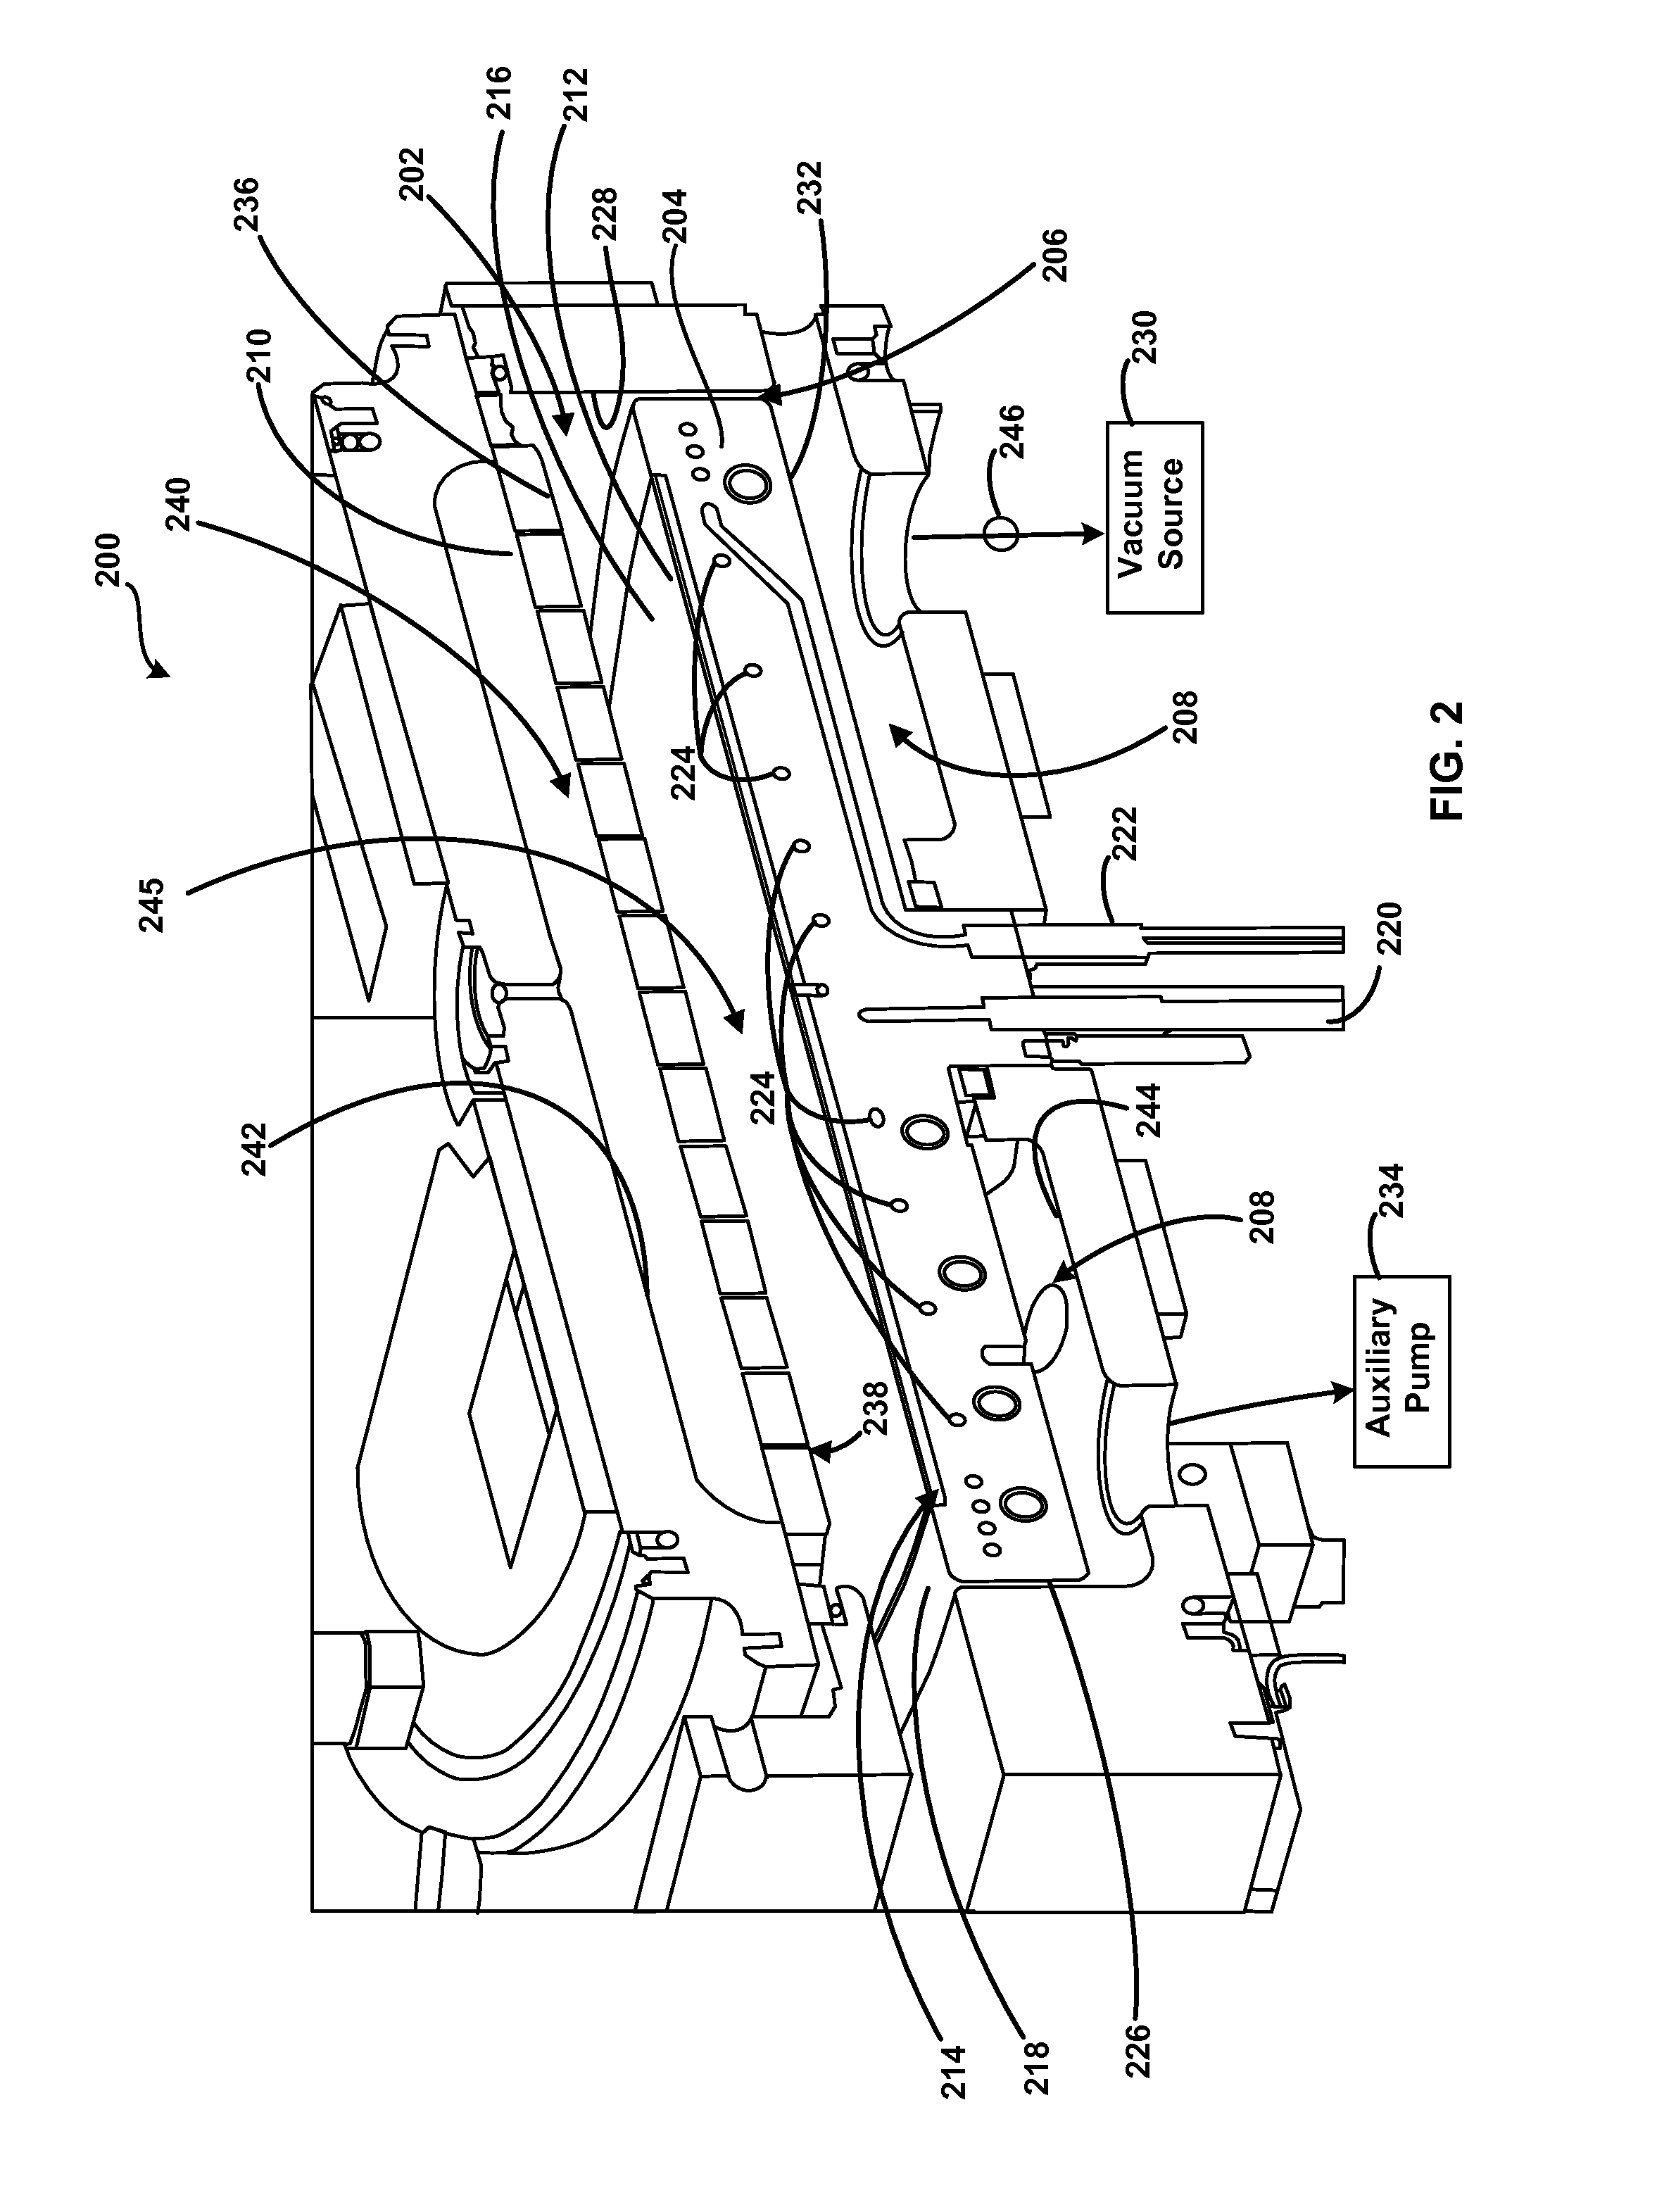 Gas-phase reactor and system having exhaust plenum and components thereof